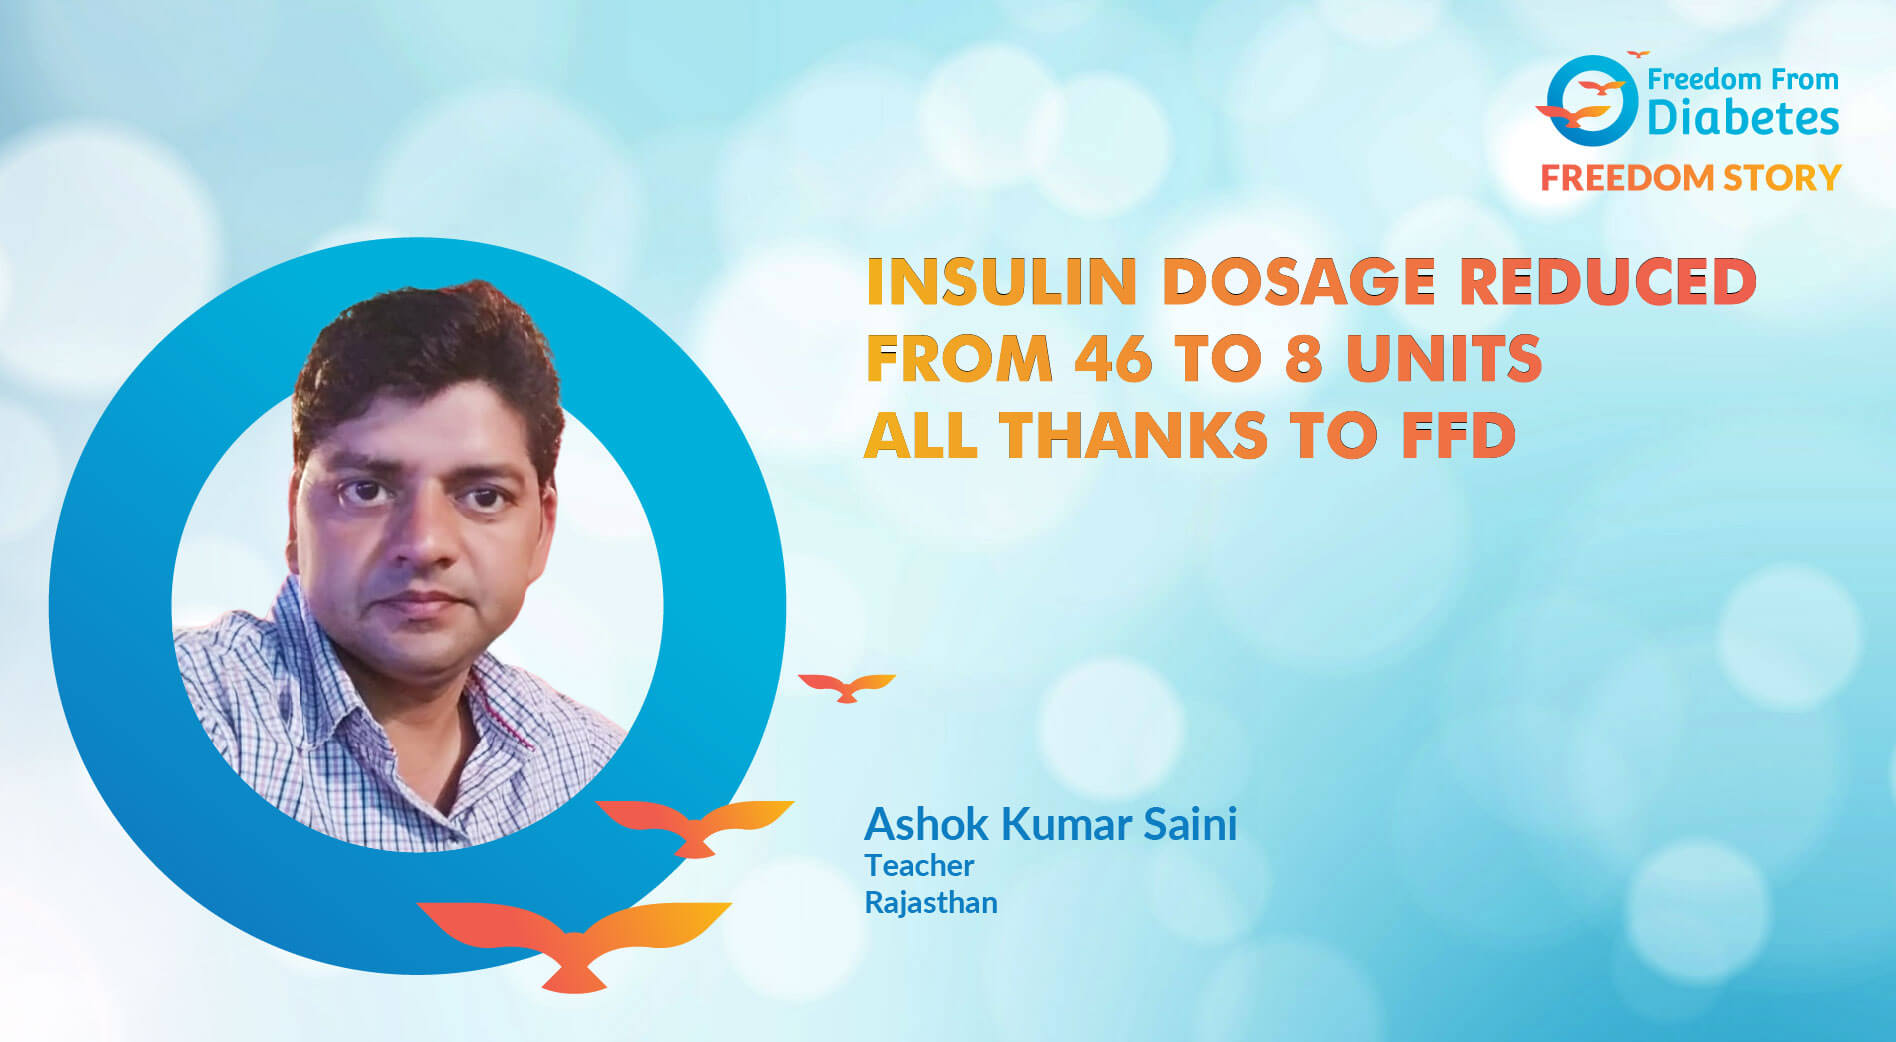 Insulin dosage reduced from 46 to 8 units all thanks to FFD